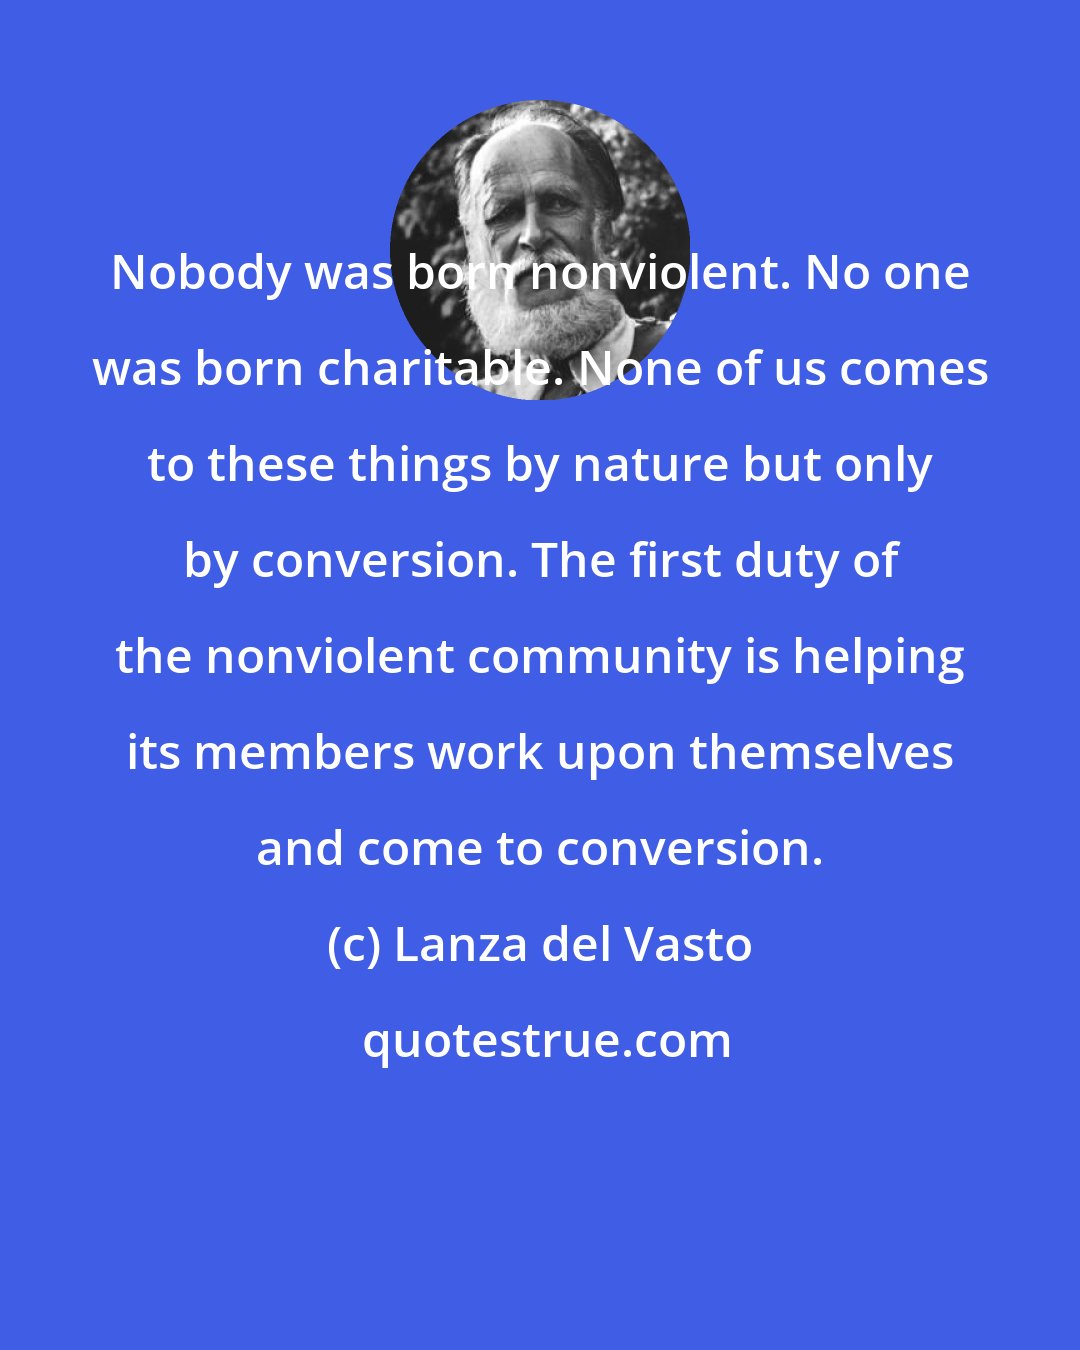 Lanza del Vasto: Nobody was born nonviolent. No one was born charitable. None of us comes to these things by nature but only by conversion. The first duty of the nonviolent community is helping its members work upon themselves and come to conversion.